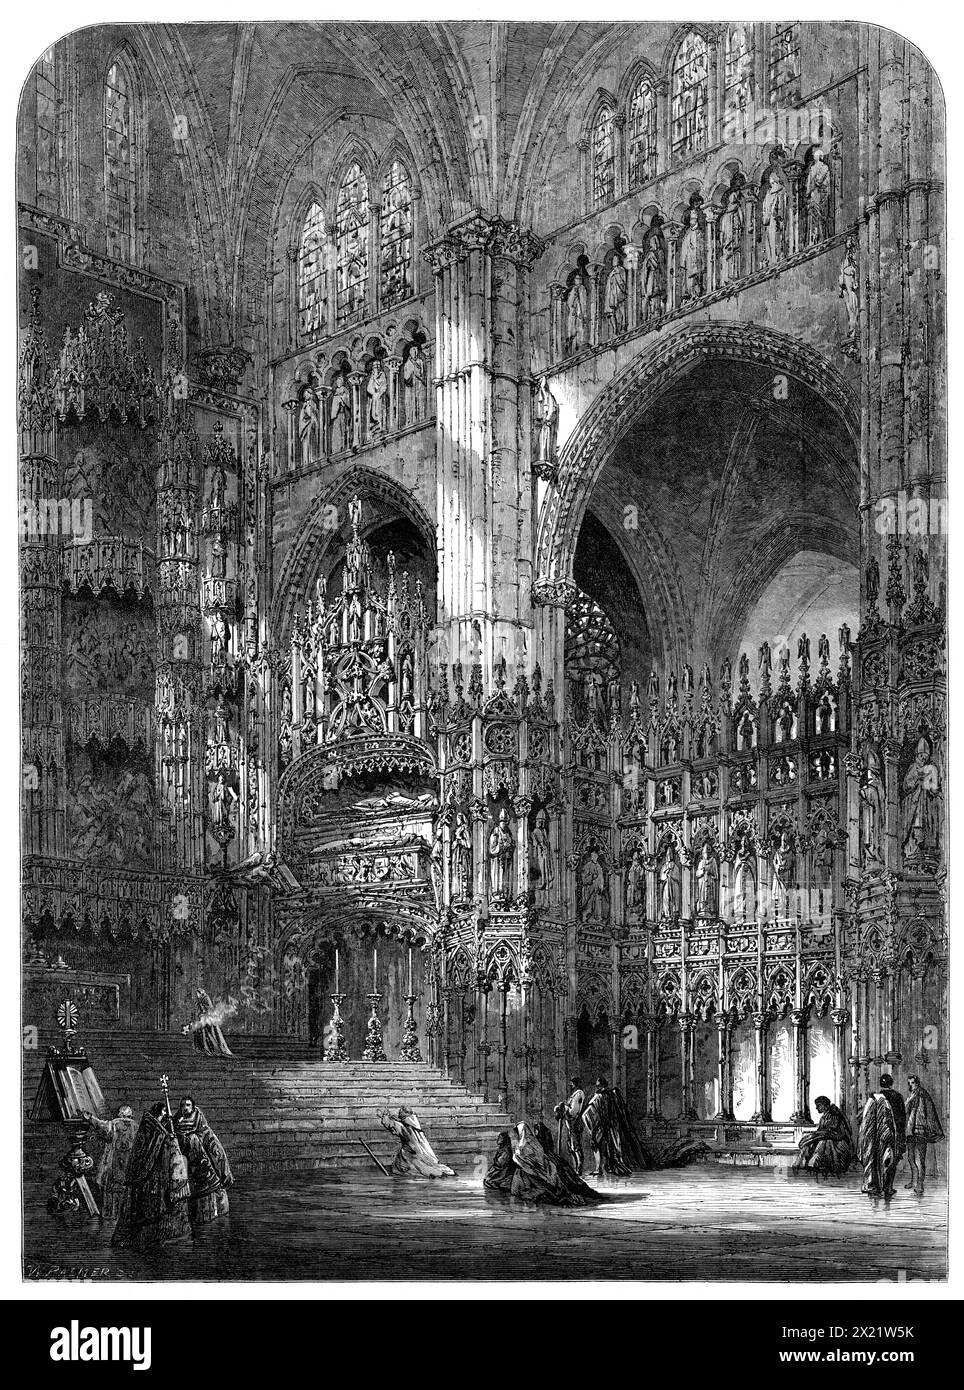 &quot;Chapel Of The High Altar In The Cathedral Of Toledo,&quot; by S. Read, in the Exhibition of the Society of Painters in Water Colours, 1864. Engraving of a painting. 'The view in...the sombre and impressive interior of the great cathedral...is taken from within the immense grille which divides the choir from the transept...Here, as in every other part of the cathedral, objects are only seen through a &quot;dim religious light,&quot; such is the massive character of the architecture and the quantity of stained glass...only a few women hooded in their mantillas, with a still smaller number Stock Photo